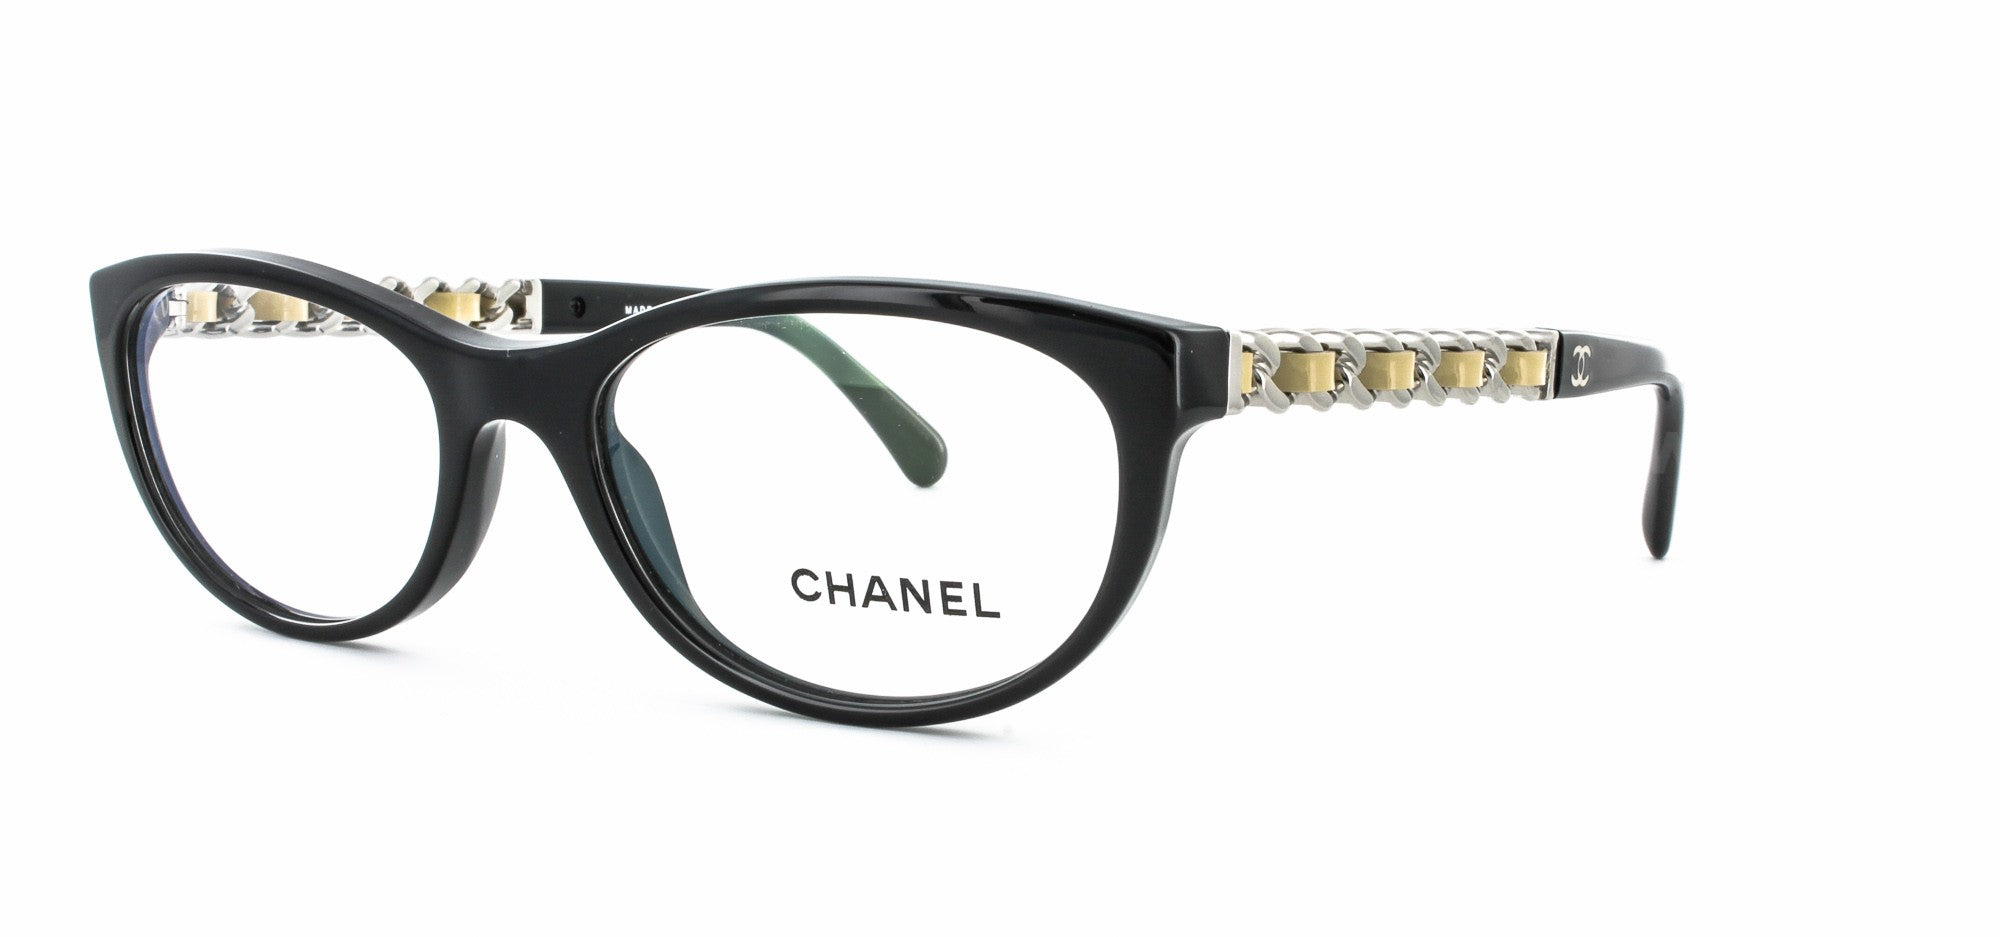 CHANEL, Accessories, Iso Chanel Eyeglass Chain Do Not Buy